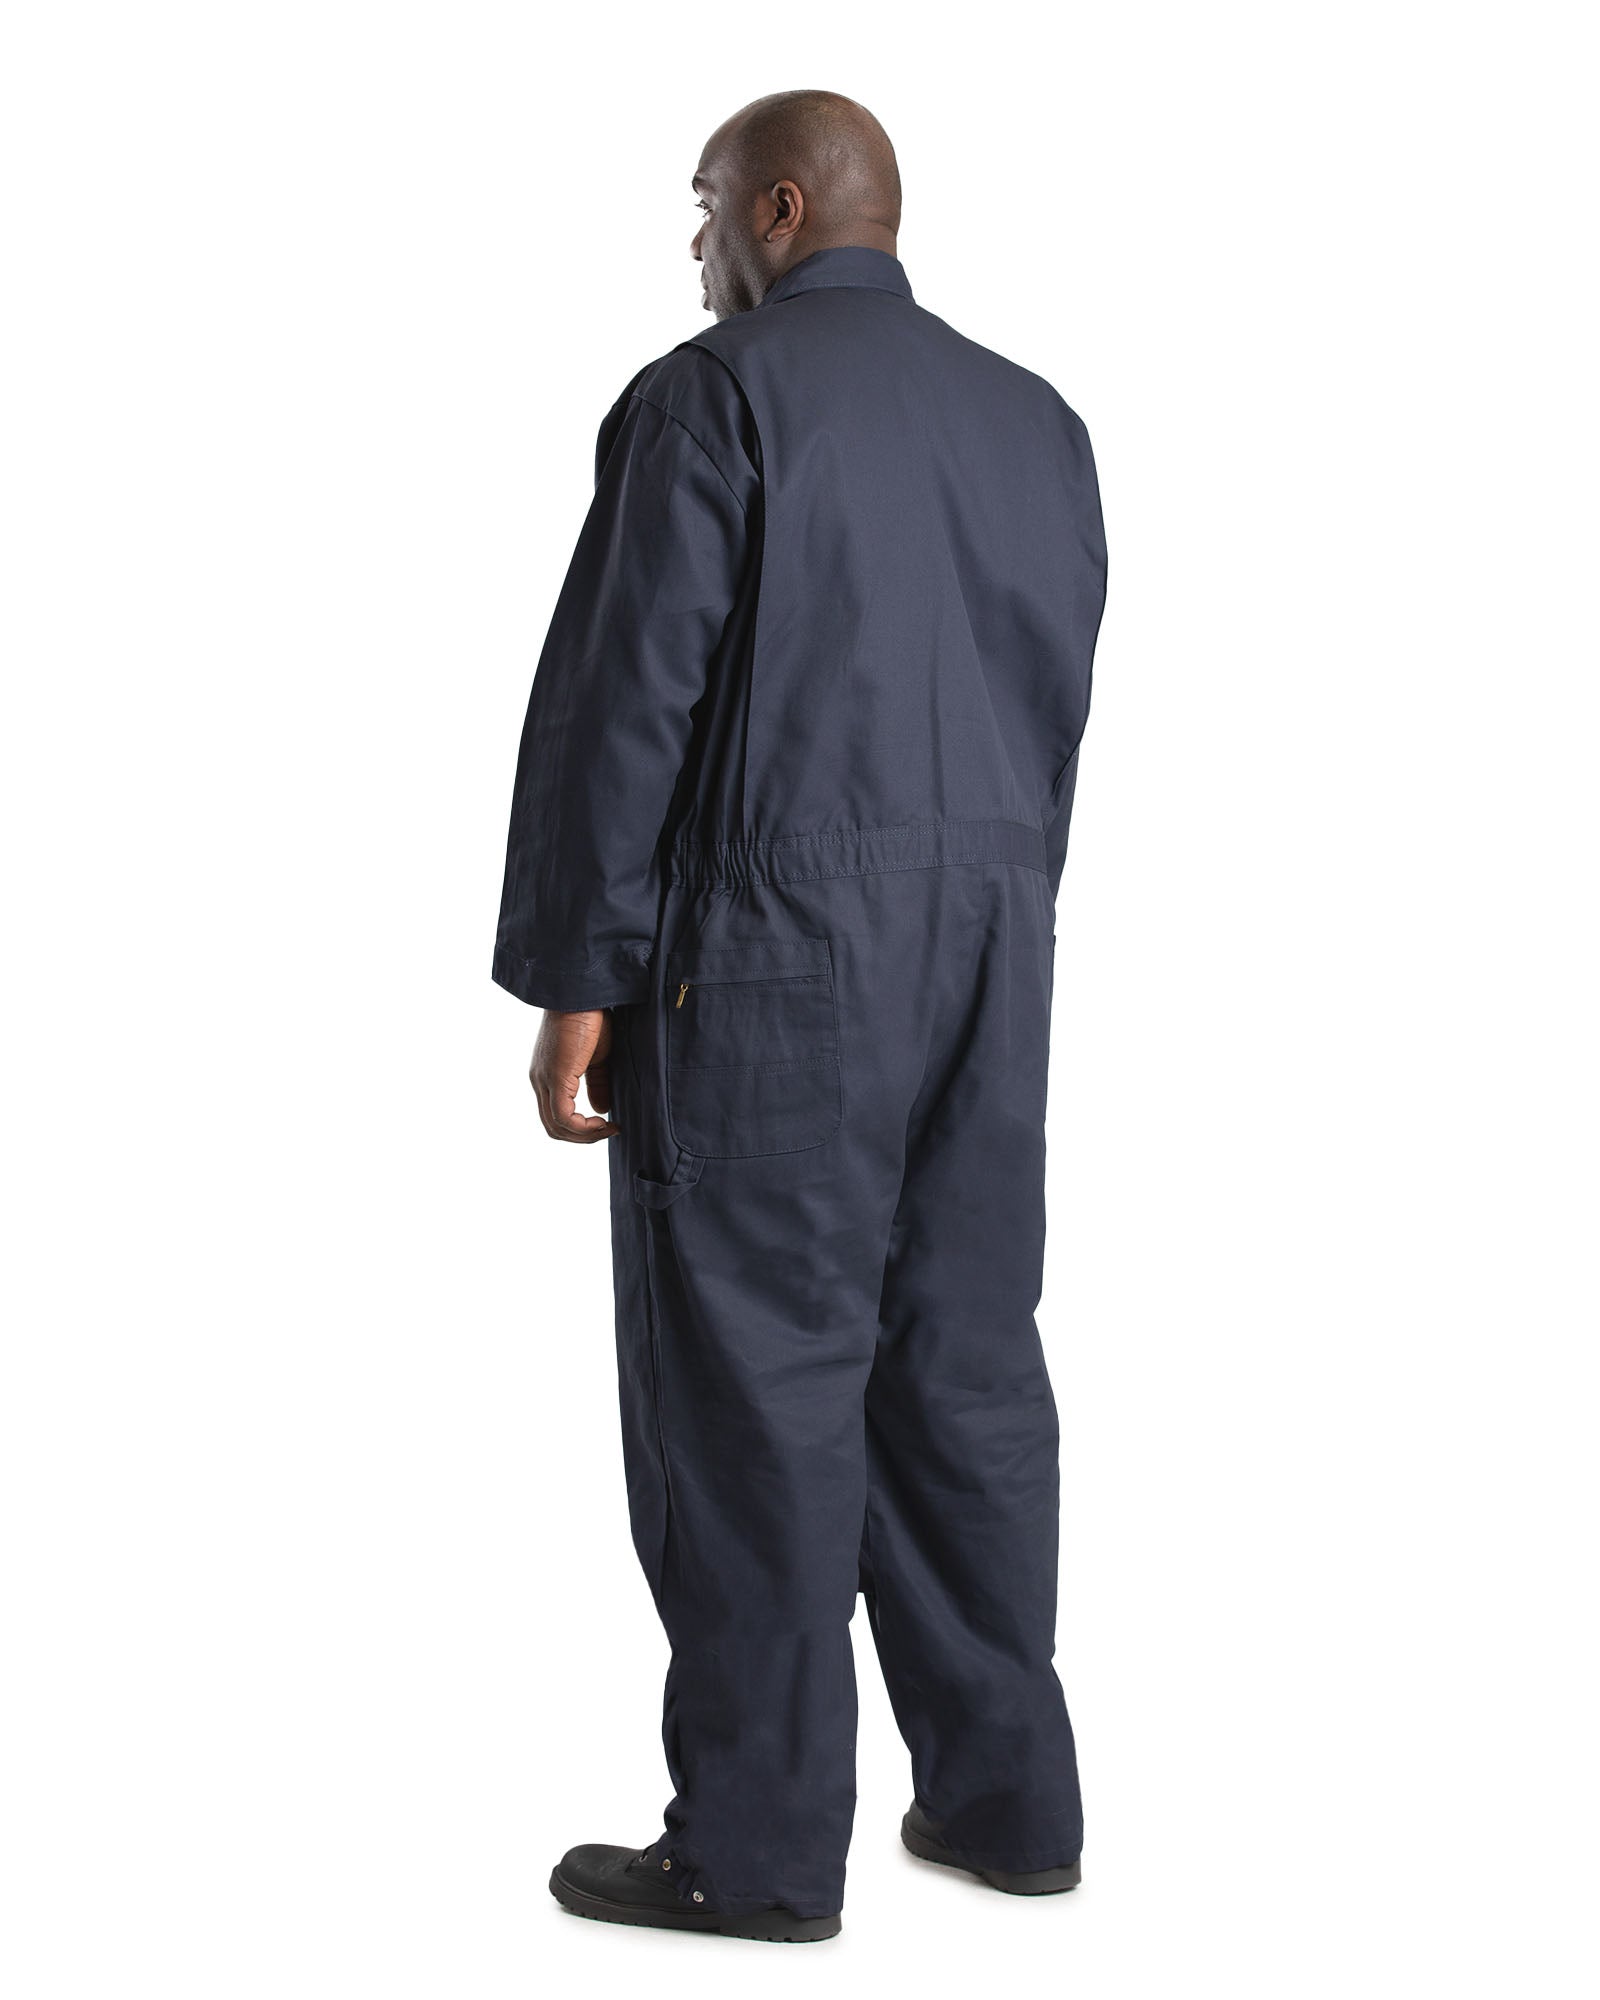 C210NV Heritage Deluxe Unlined Cotton/Poly Blend Twill Coverall